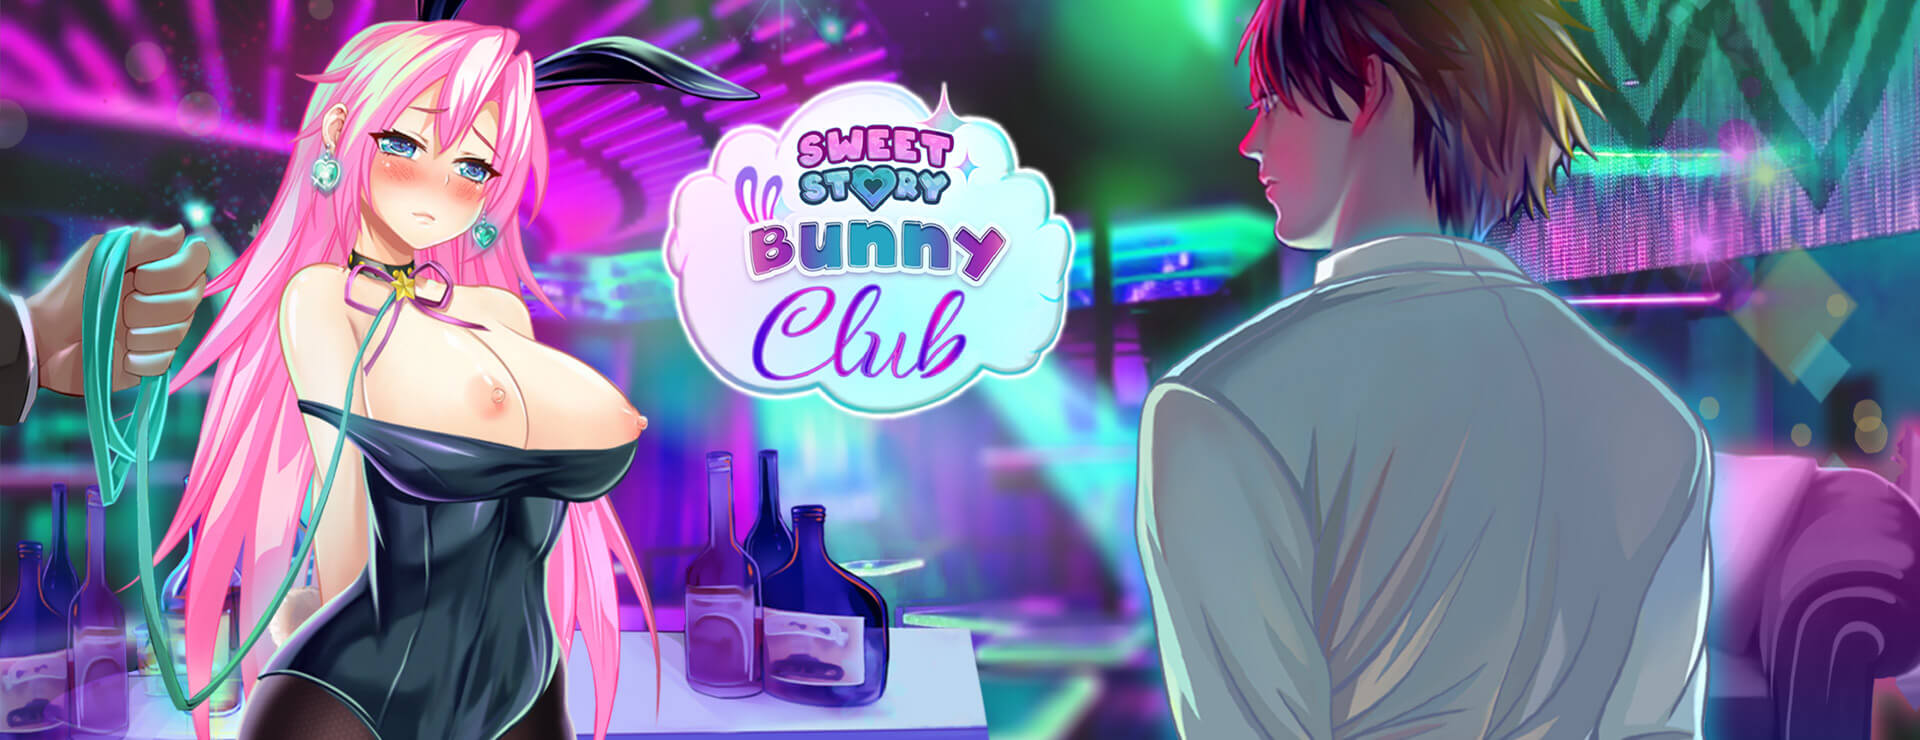 Sweet Story Bunny Club - Casual Game